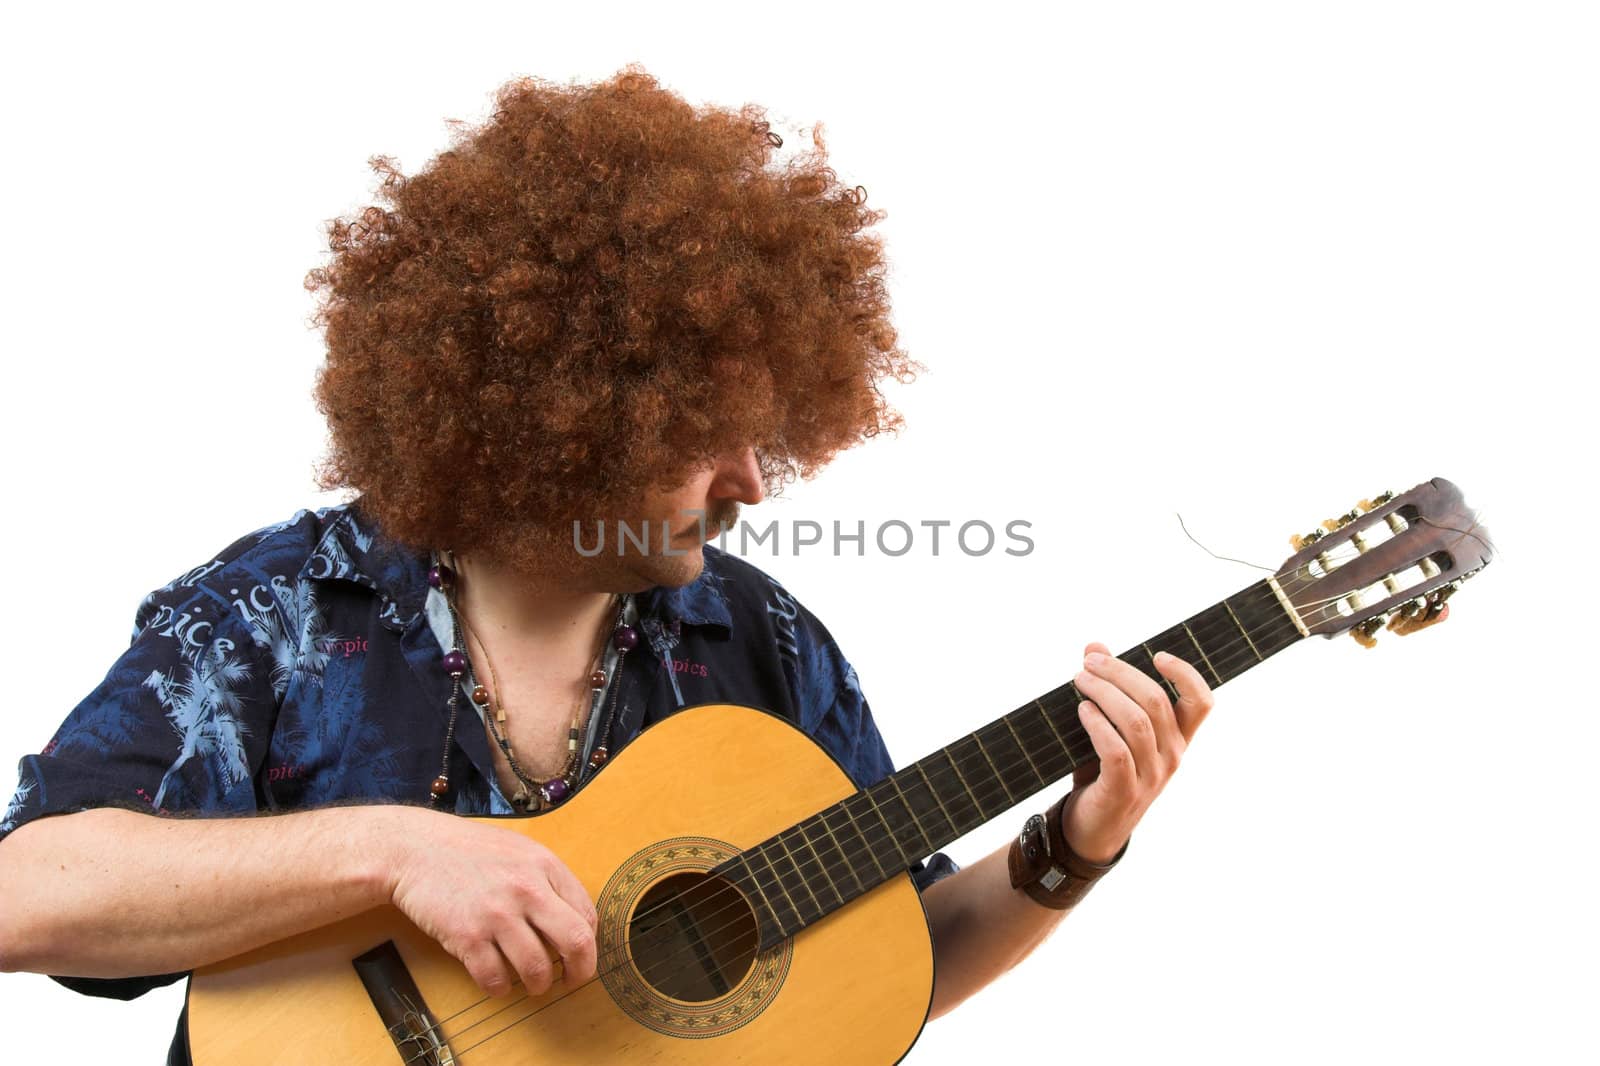 Old hippie with wild afro hair playing his guitar (text on shirt is not a brandname)